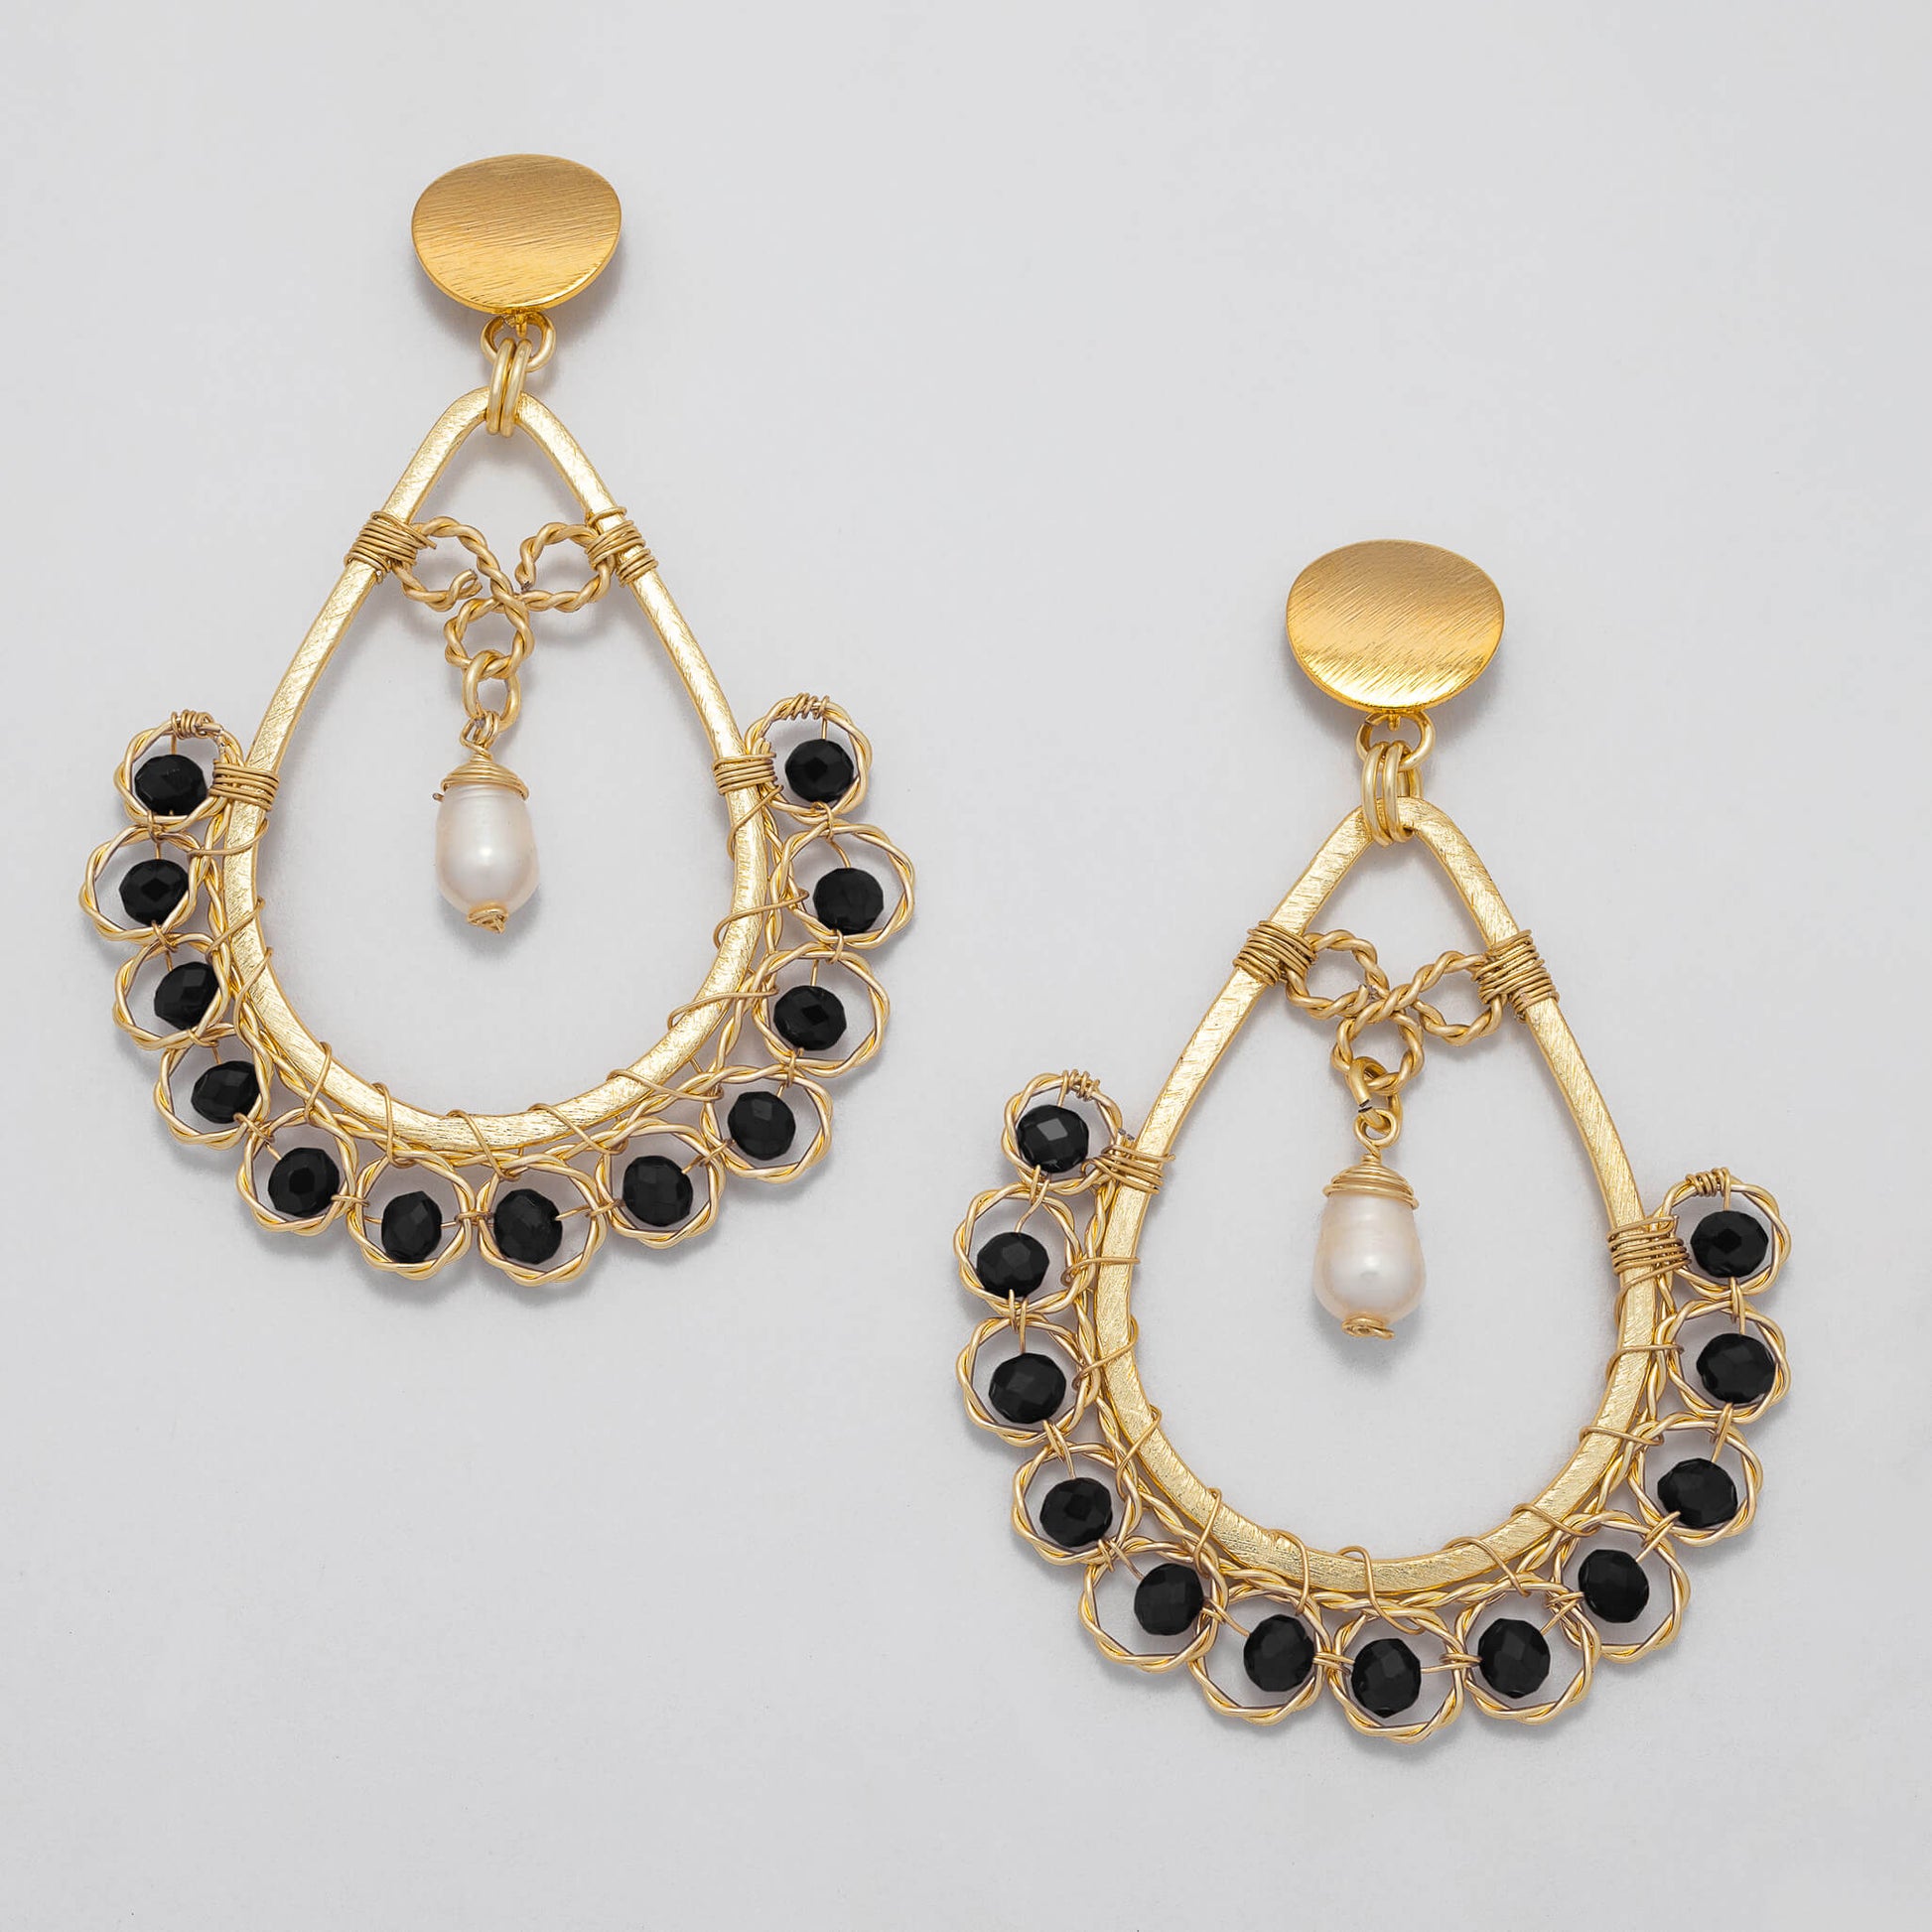 Amara I Earrings are 3 inches long. Gold teardrop Earrings. Gold, Black, and White earrings. Handmade with Faceted Crystal beads and freshwater pearls. Wire Wrapped Earrings.